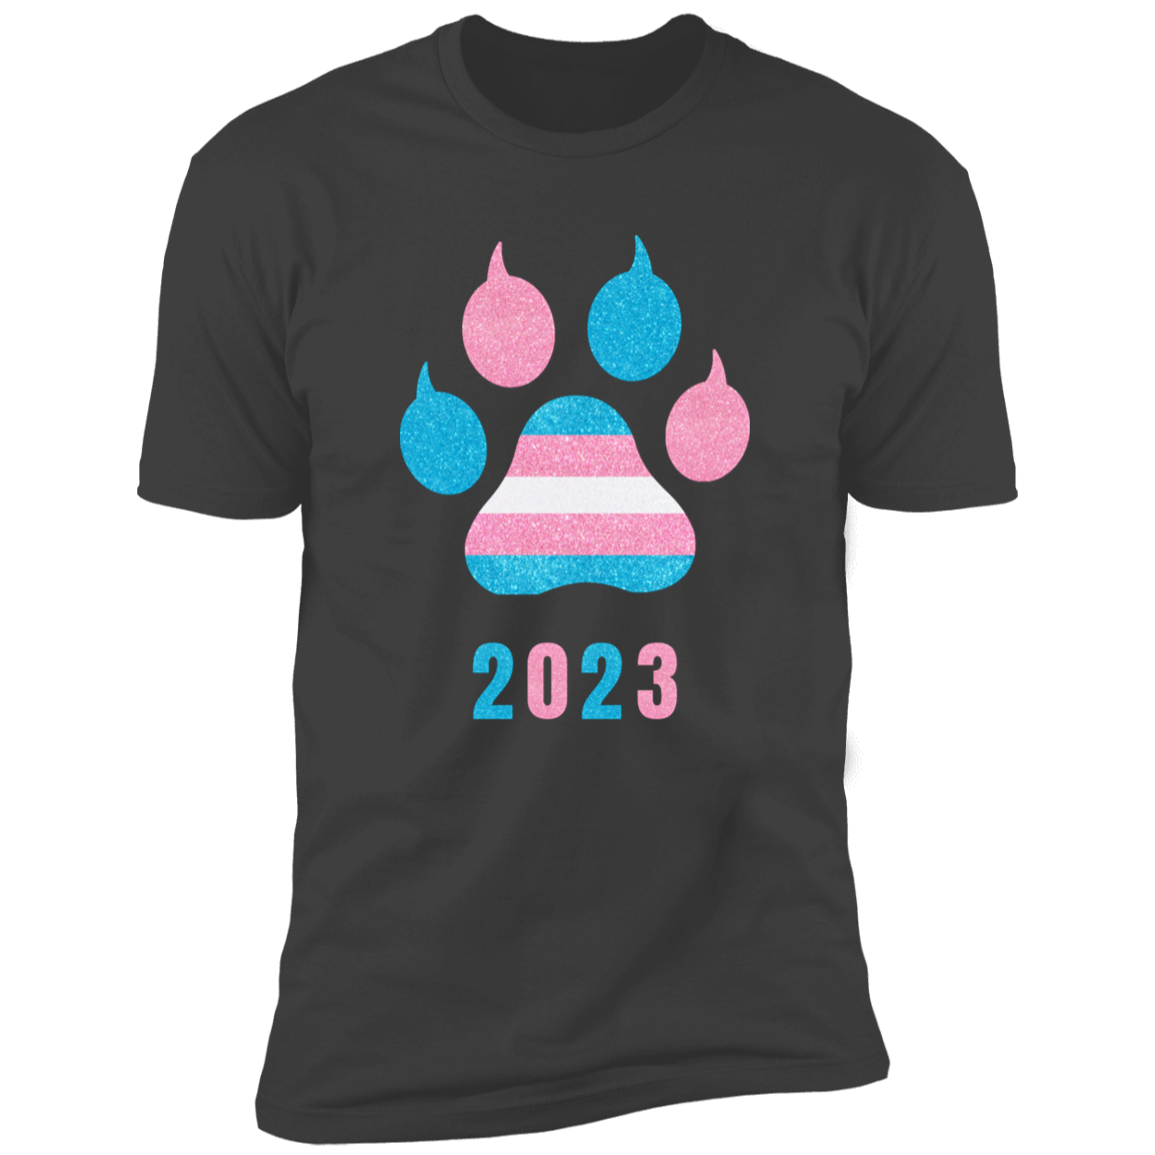 Trans Pride 2023 Cat Paw trans pride t-shirt,  trans cat paw pride shirt for humans, in heavy metal gray